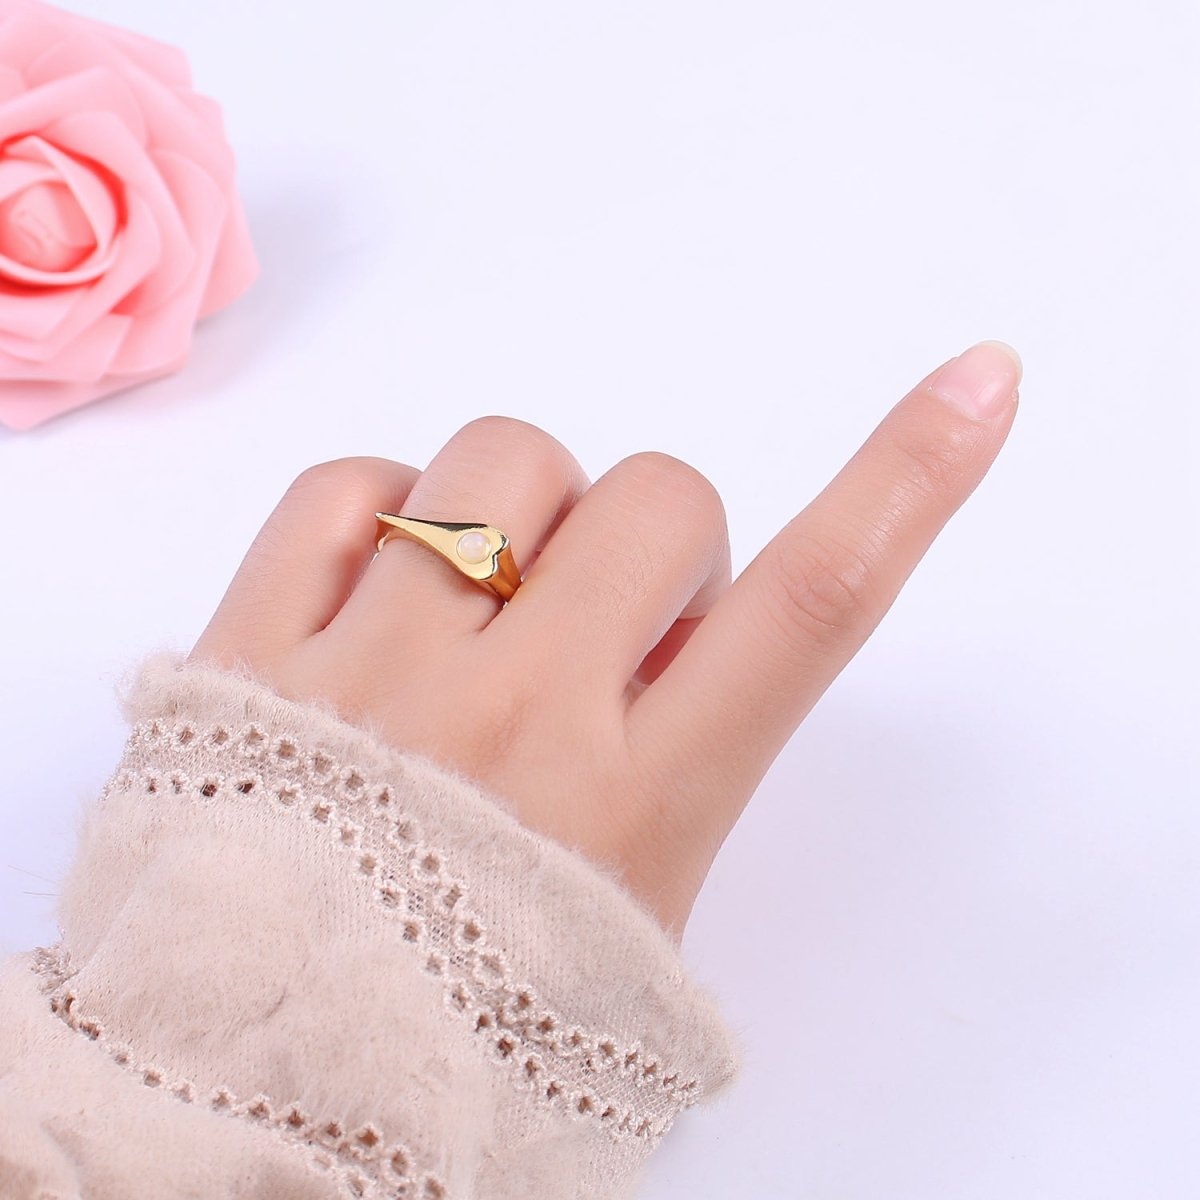 Dainty Opal Signet Long Heart Ring - Adjustable Gold Filled Ring Minimalist Jewelry for Valentine U-226 - DLUXCA